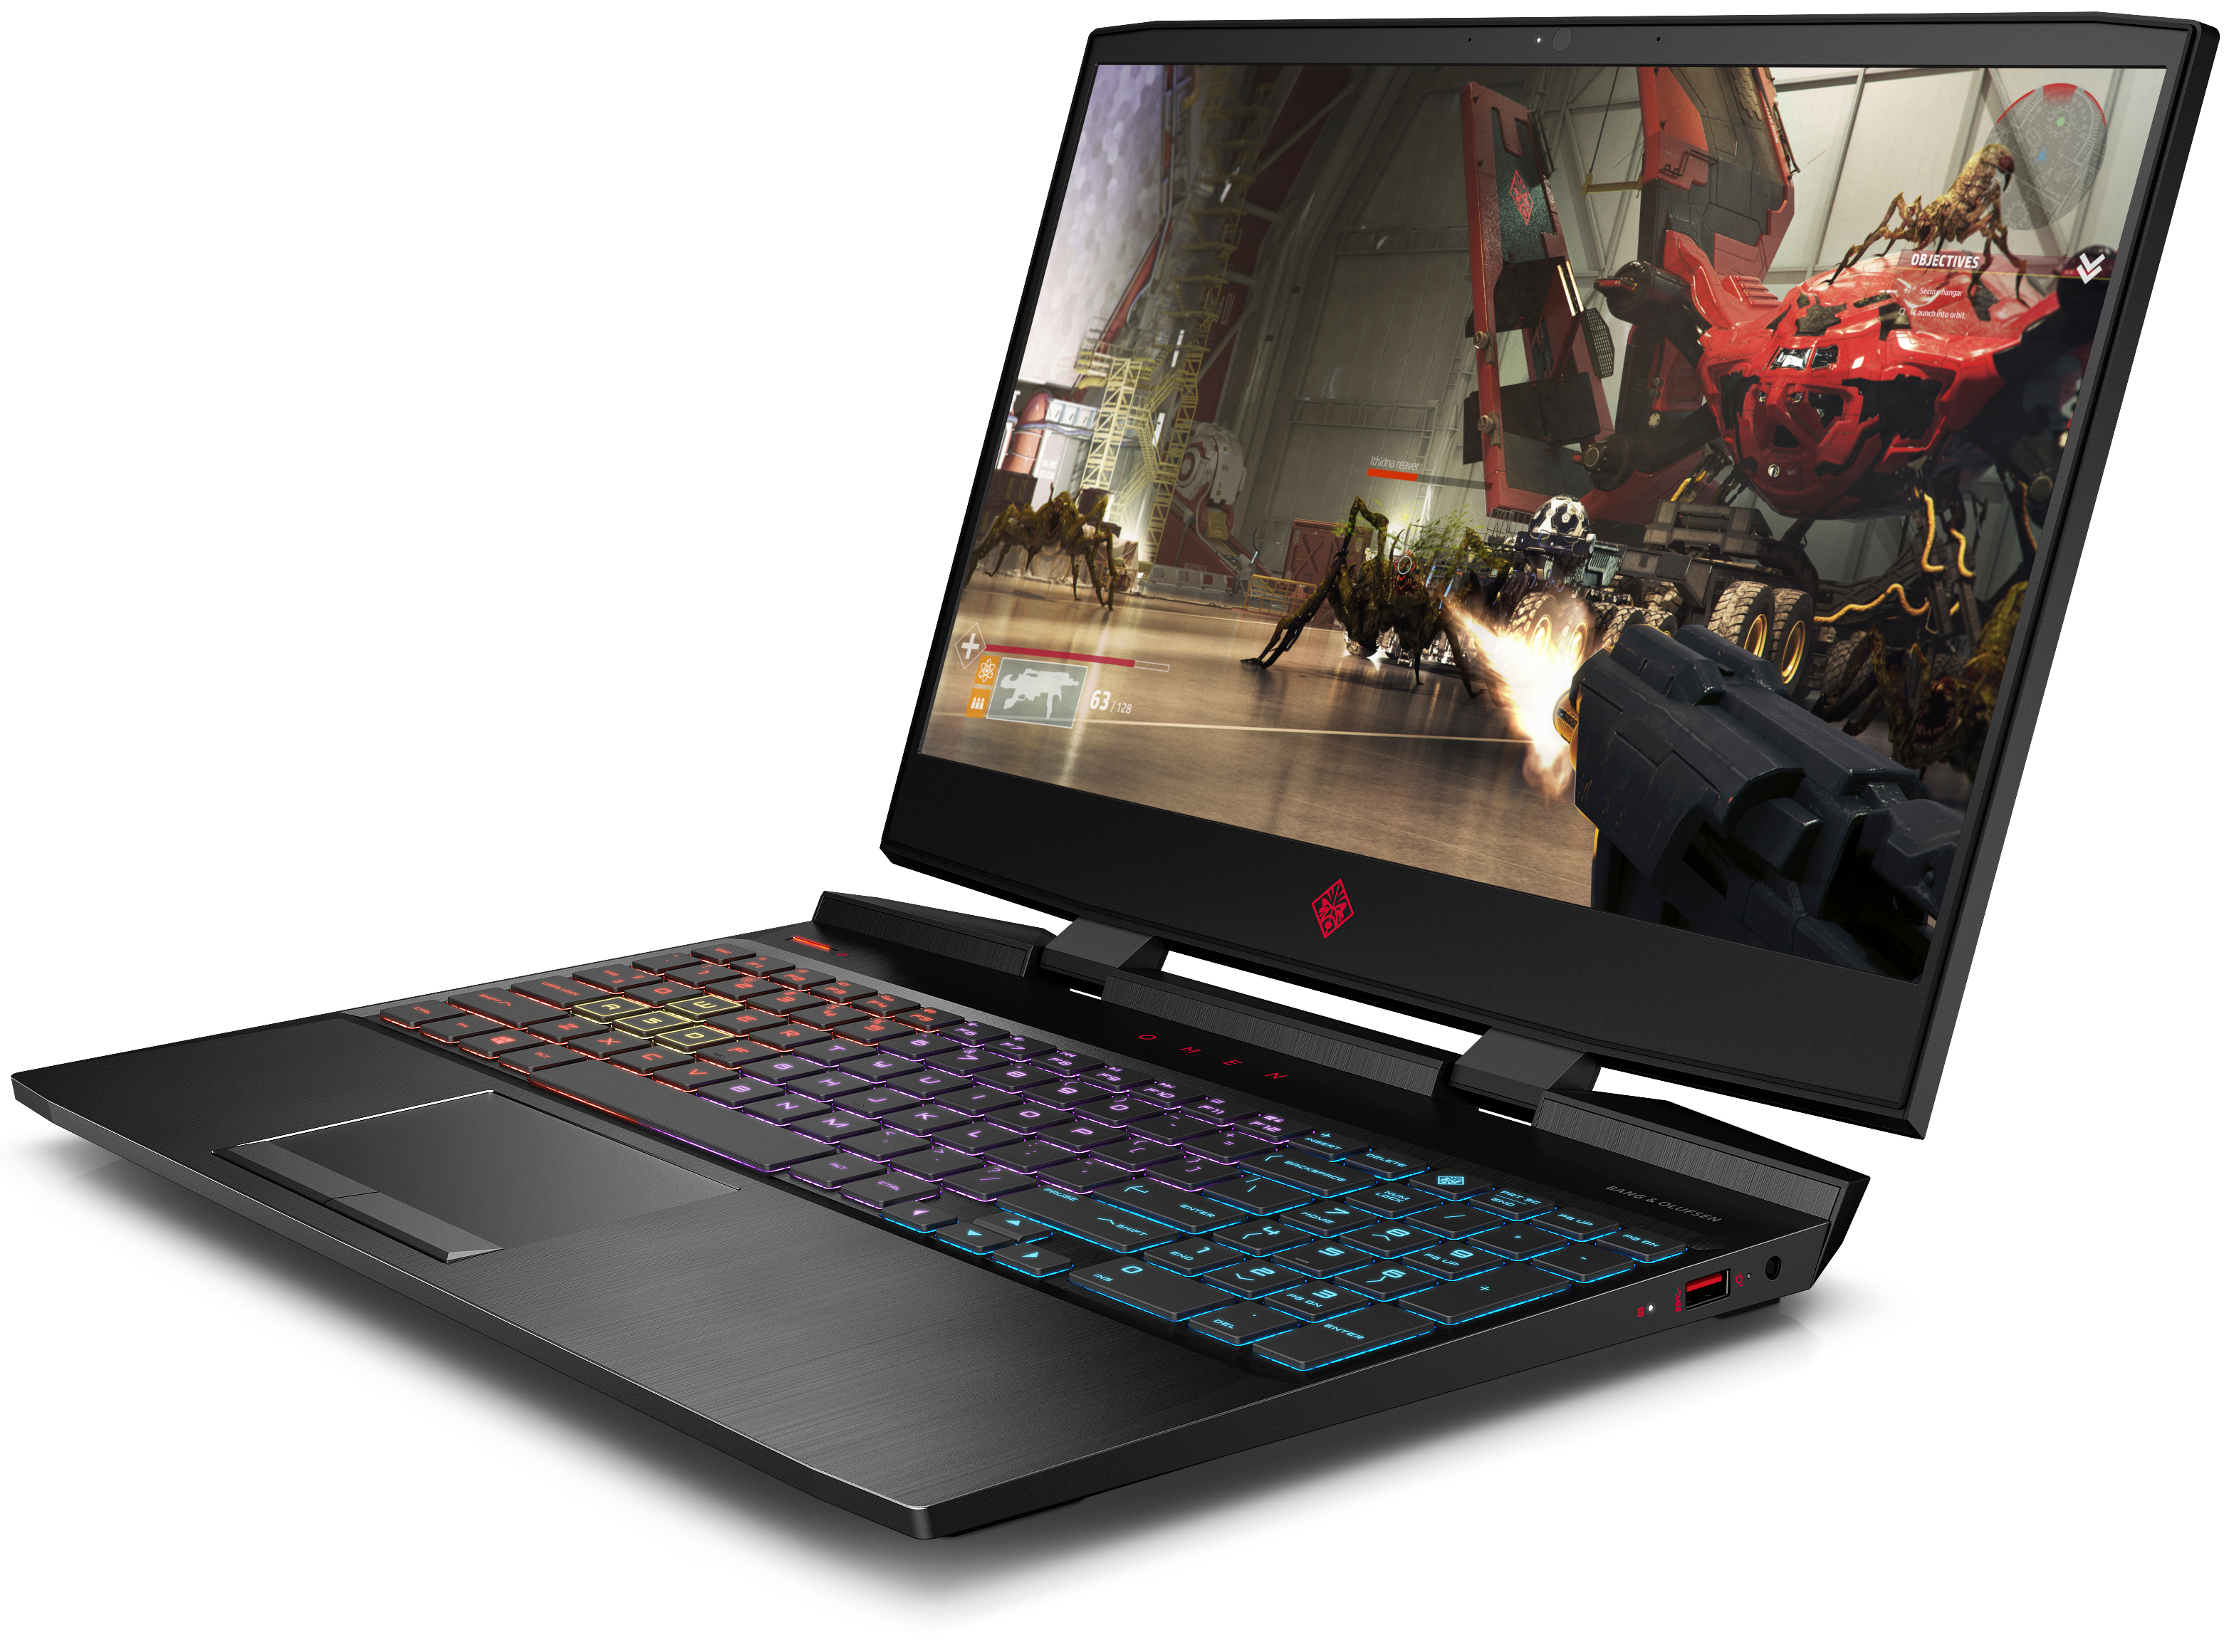 HP's Omen 15 is the first gaming laptop with a 240Hz display